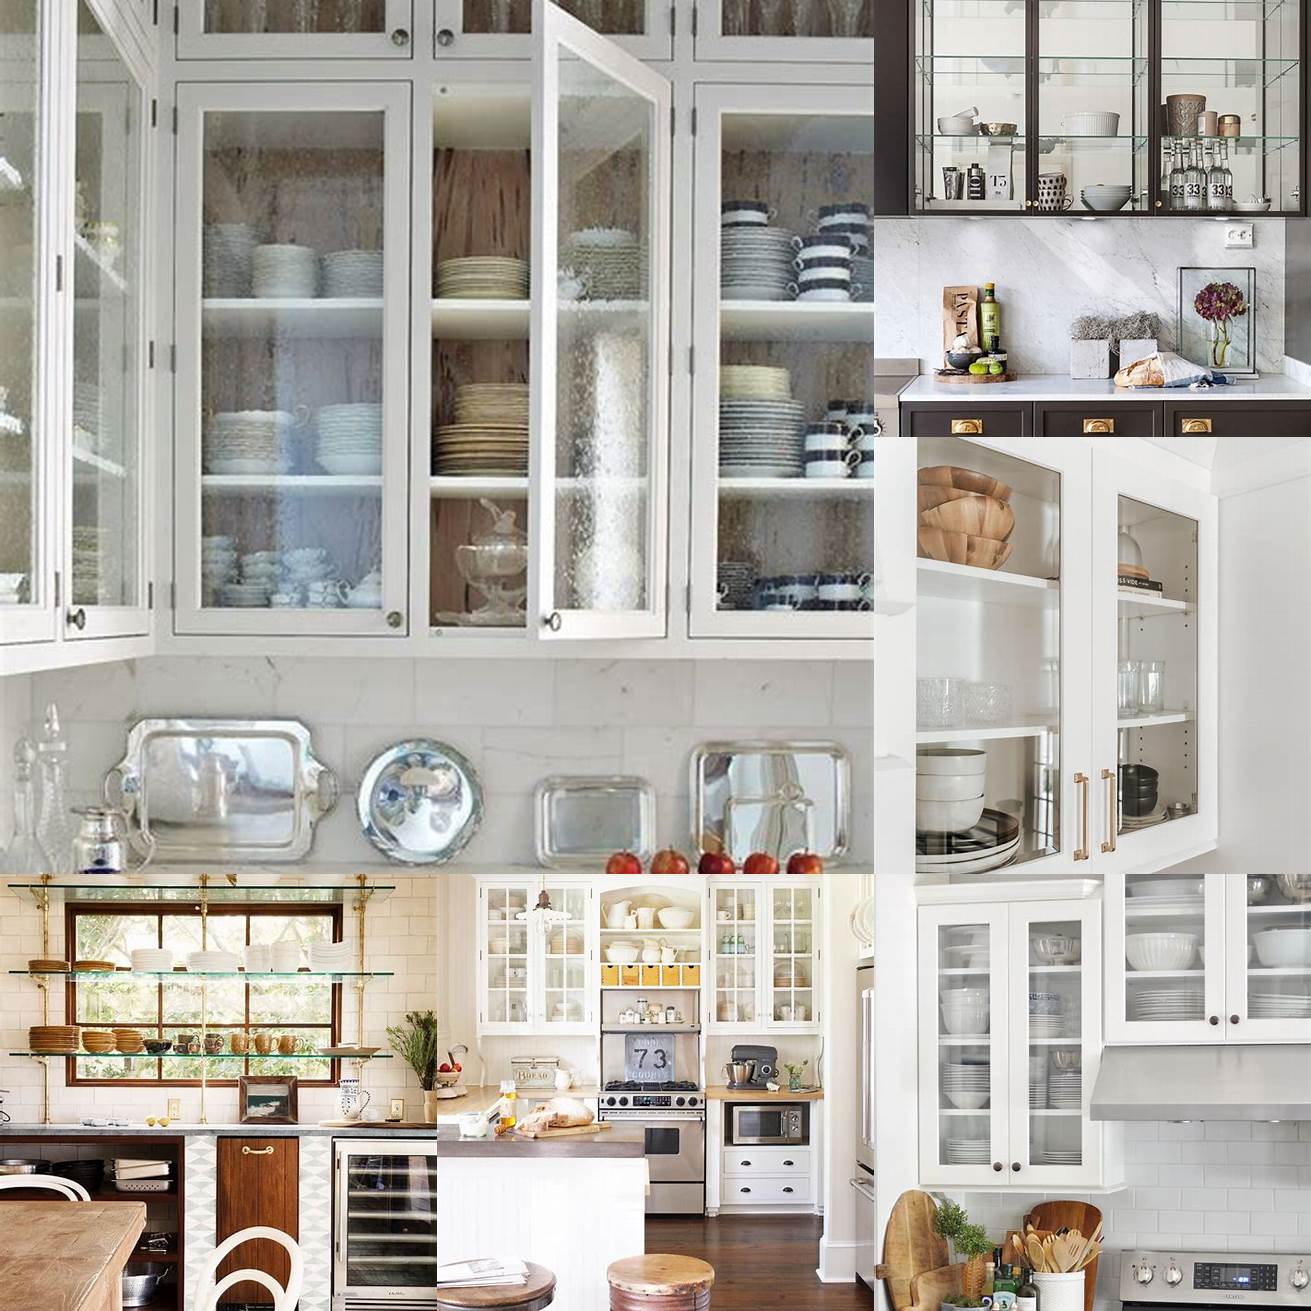 Open shelving and glass-front cabinets